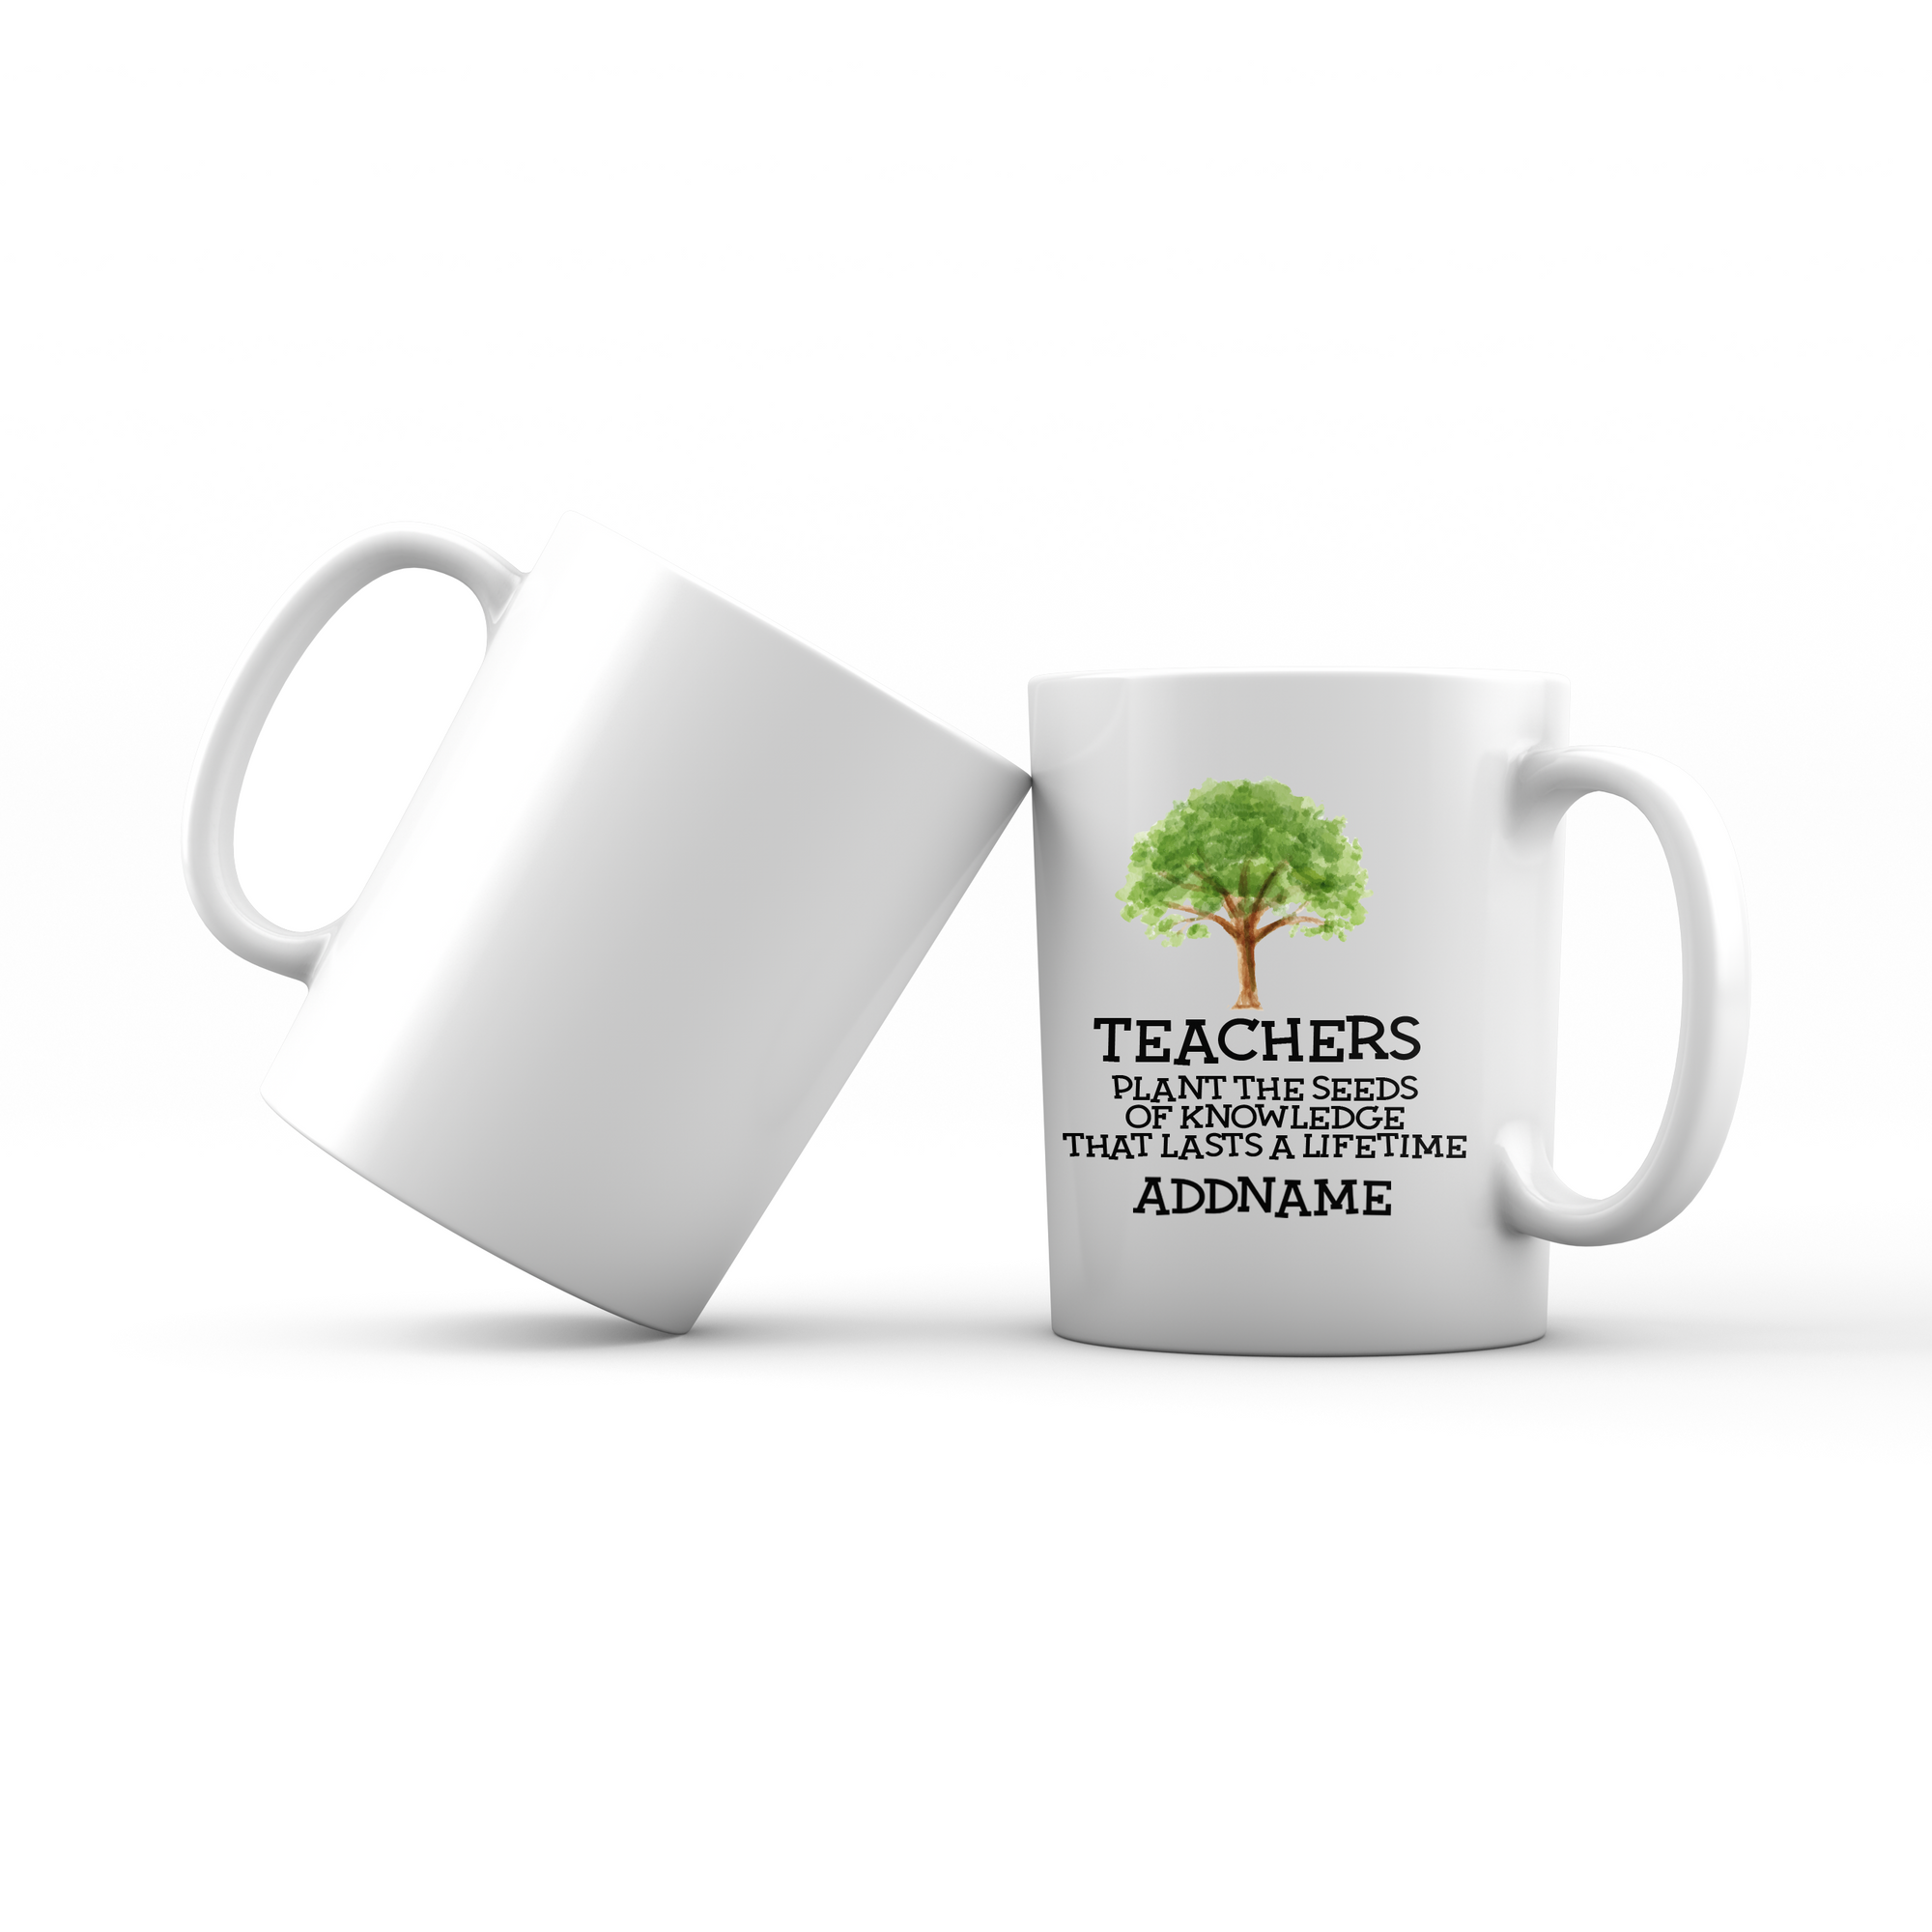 Teacher Quotes 2 Teachers Plant The Seeds Of Knowledge That Lasts A Lifetime Addname Mug